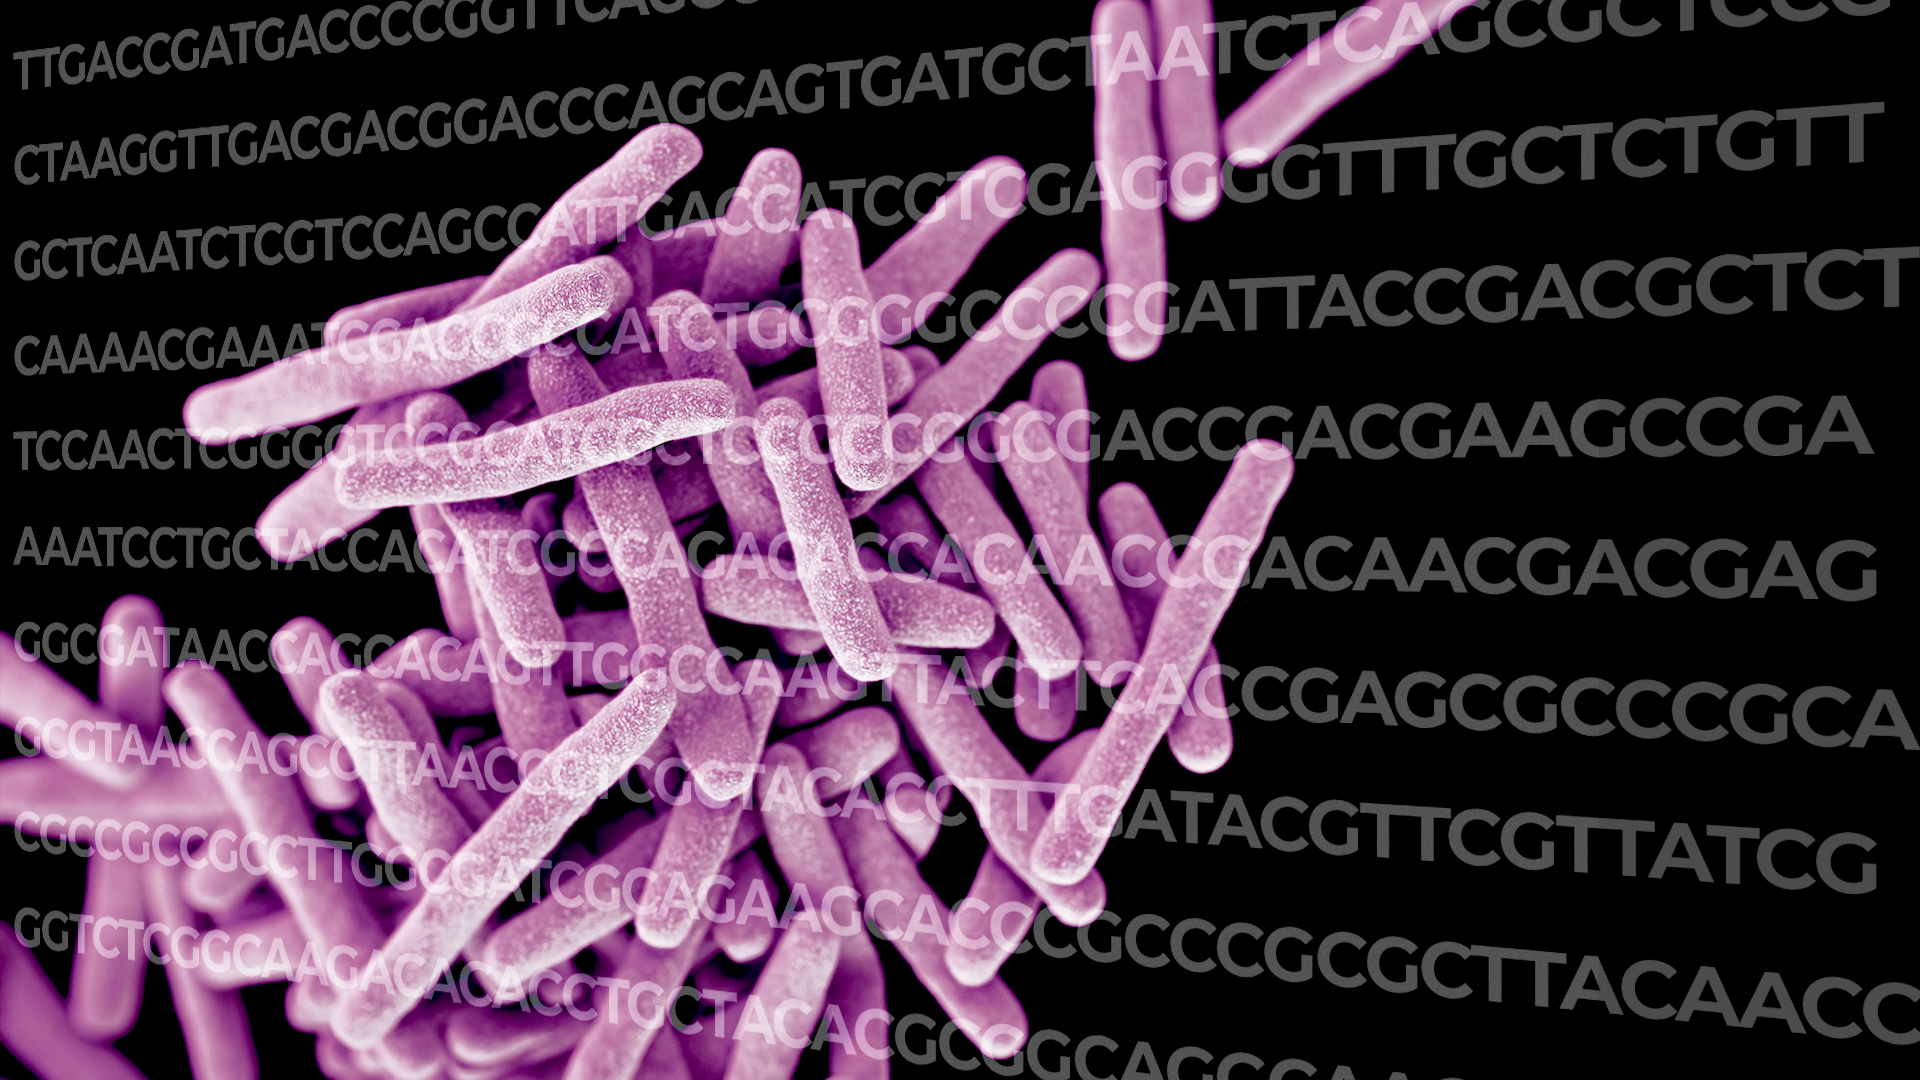 Sudden jumps punctuate gradual changes in bacterial gene sequences